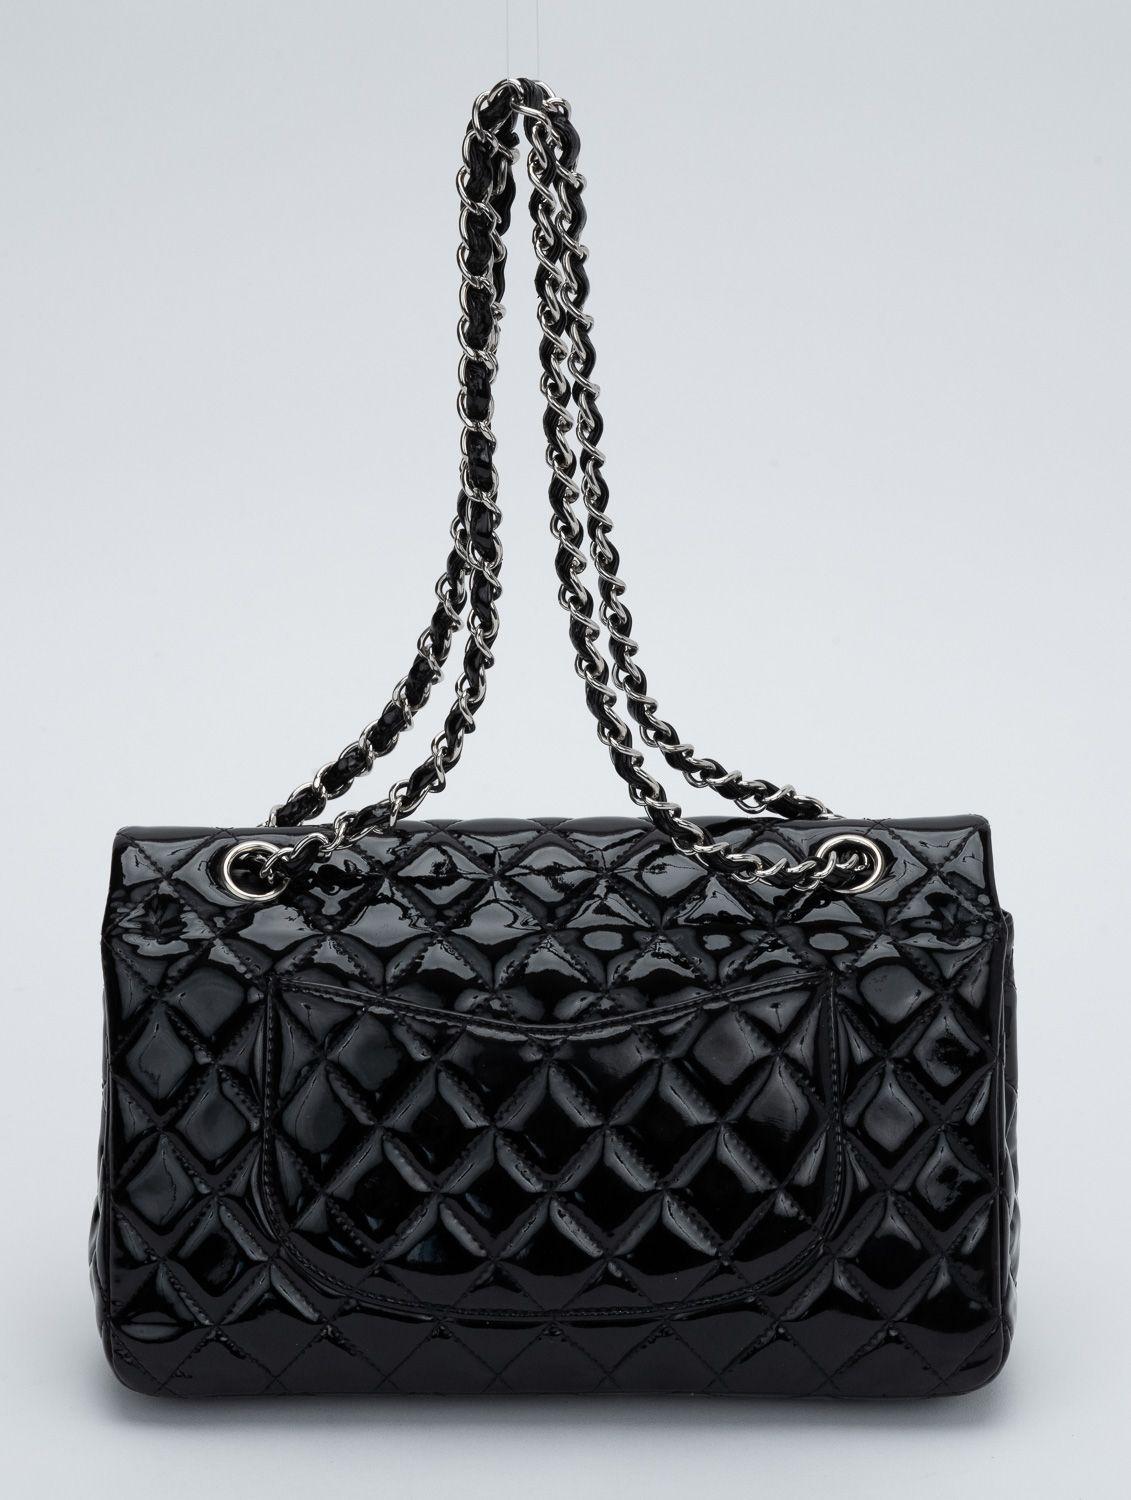 Chanel black classic double flap in patent leather and silver tone hardware. Can be worn two ways: shoulder drop, 17.5